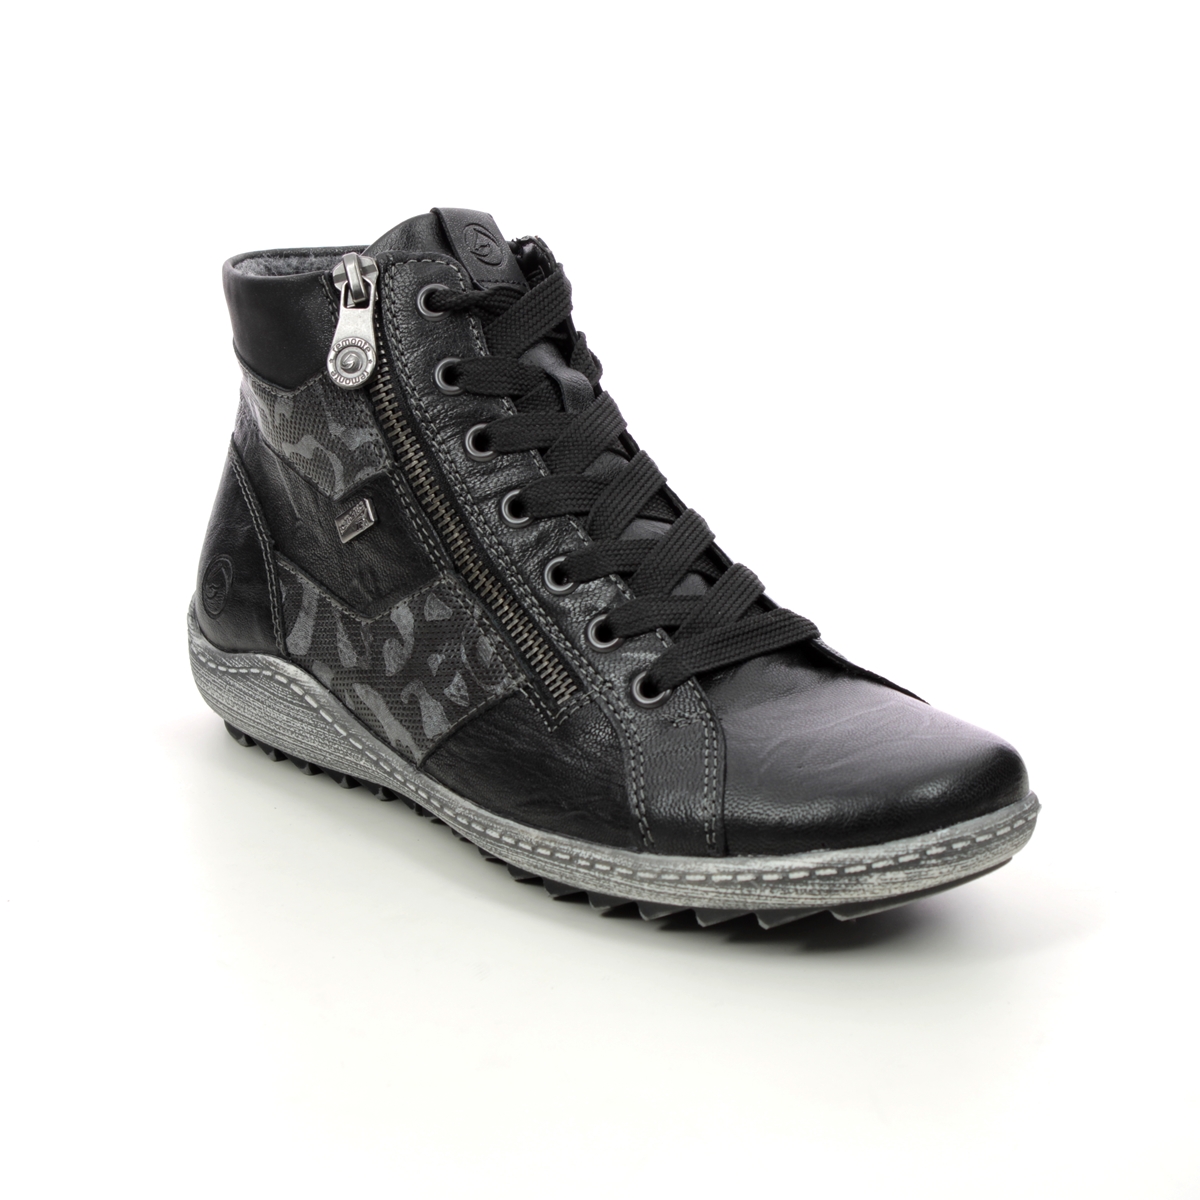 Remonte Ziginzips Tex Black Leather Womens Hi Tops R1484-02 In Size 43 In Plain Black Leather